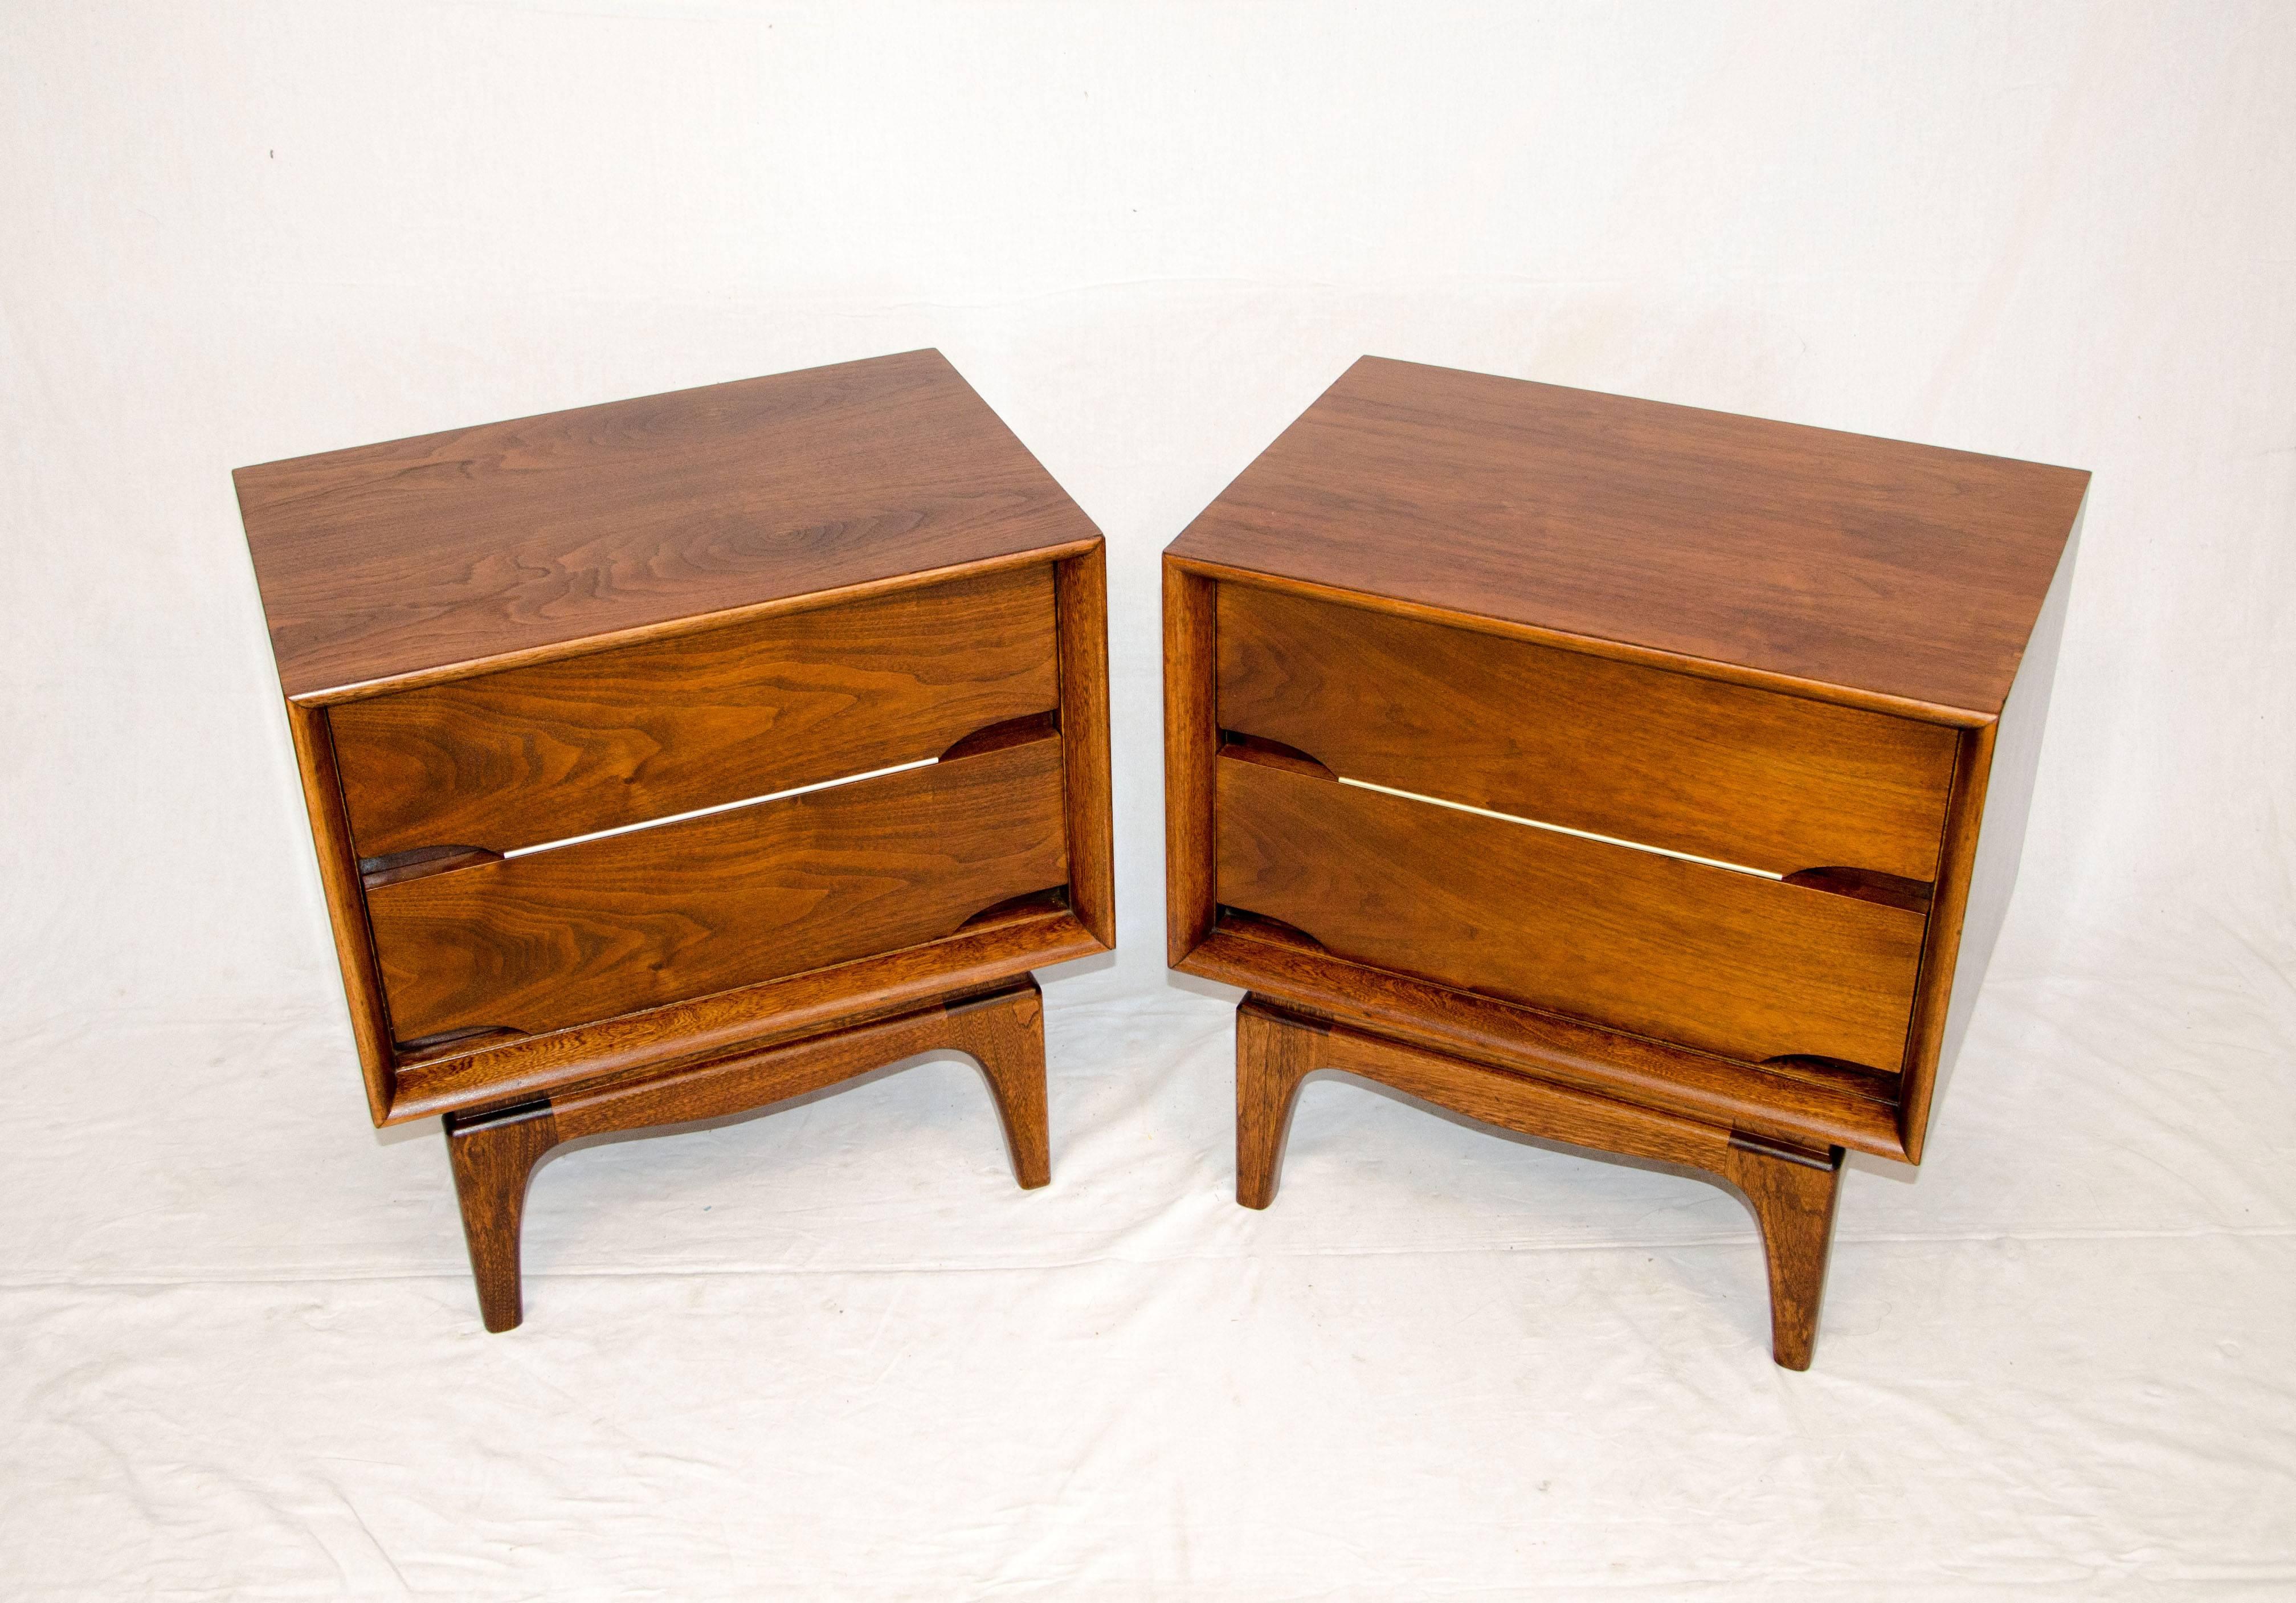 Pair of Mid-Century walnut nightstands with two drawers. The base is 9 1/2